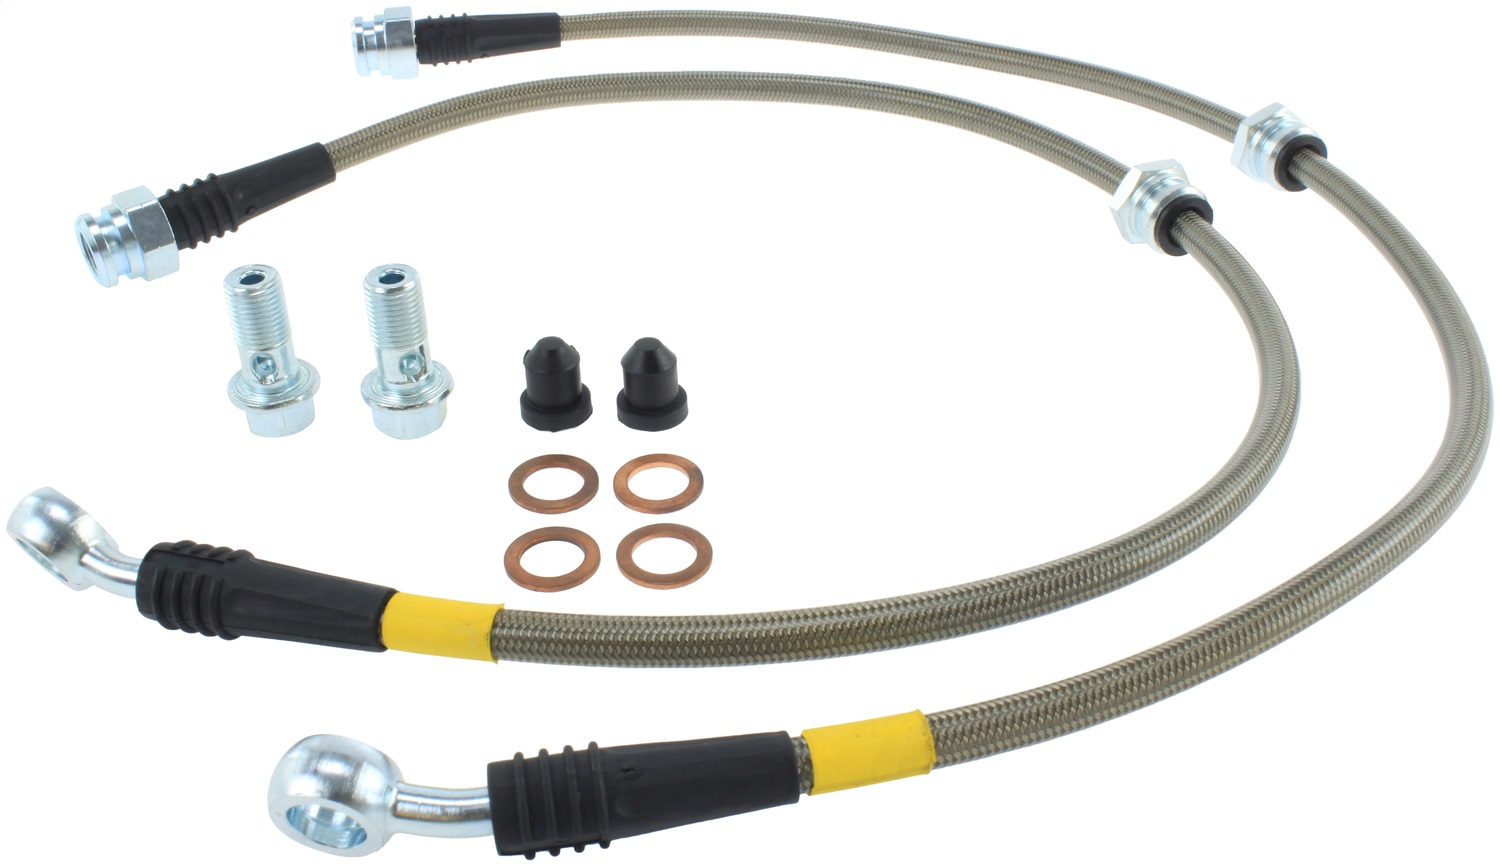 StopTech 950.45501 Stainless Steel Hose Set Fits 01-03 Protege Protege5